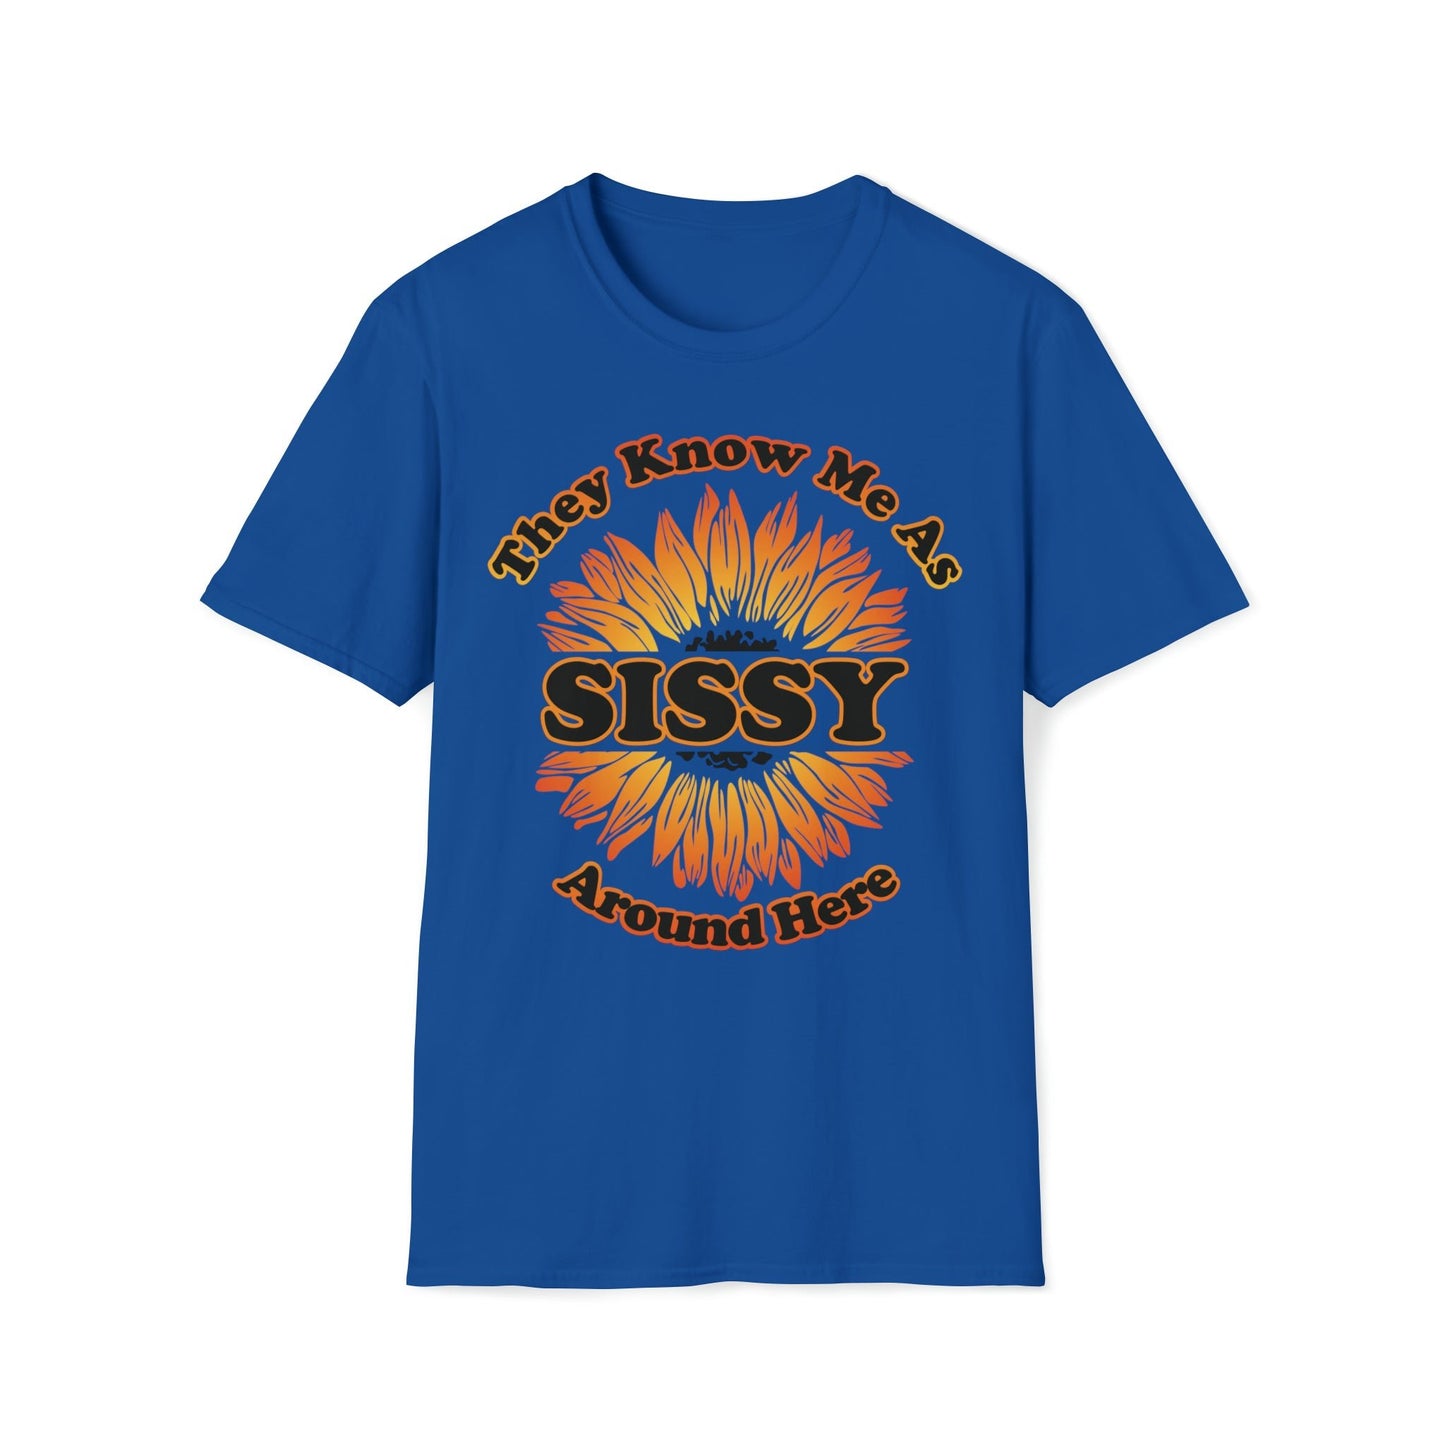 They Know Me As Sissy Around Here - Unisex Softstyle T-Shirt - Ohio Custom Designs & Apparel LLC